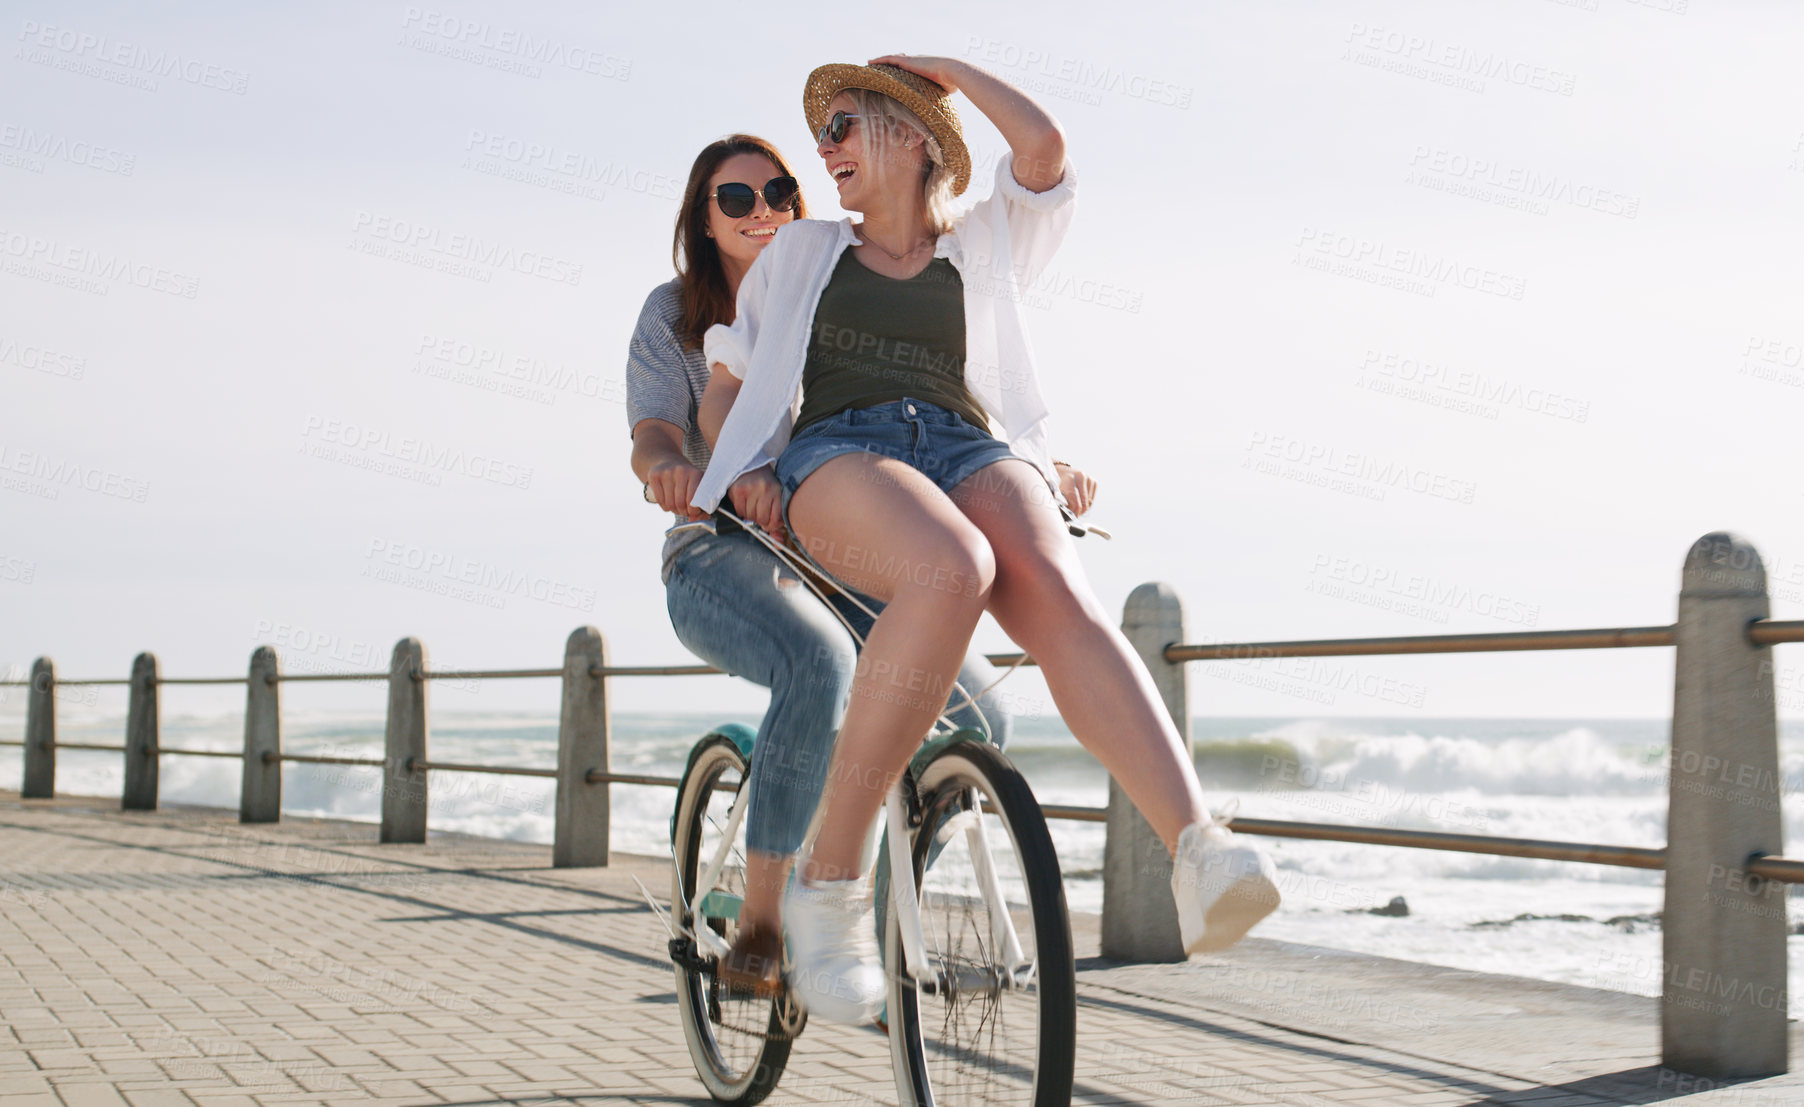 Buy stock photo Full length shot of a happy young couple riding a bicycle together on a promenade near the beach